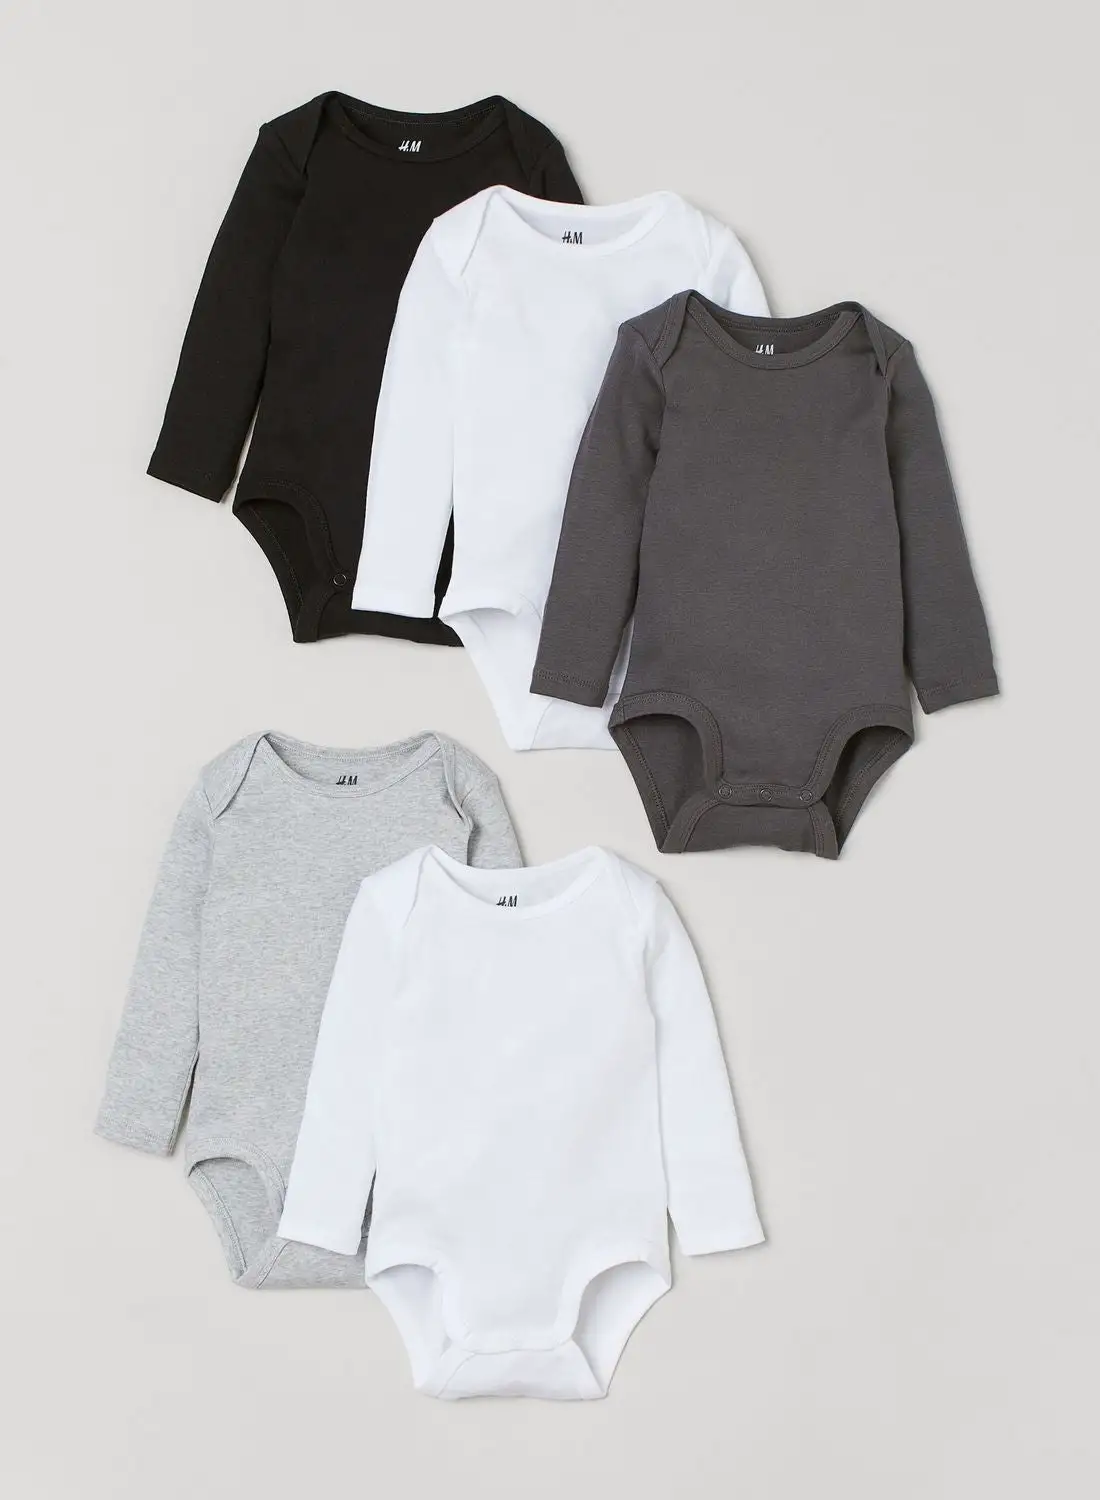 H&M Kids 5 Pack Assorted Bodysuits